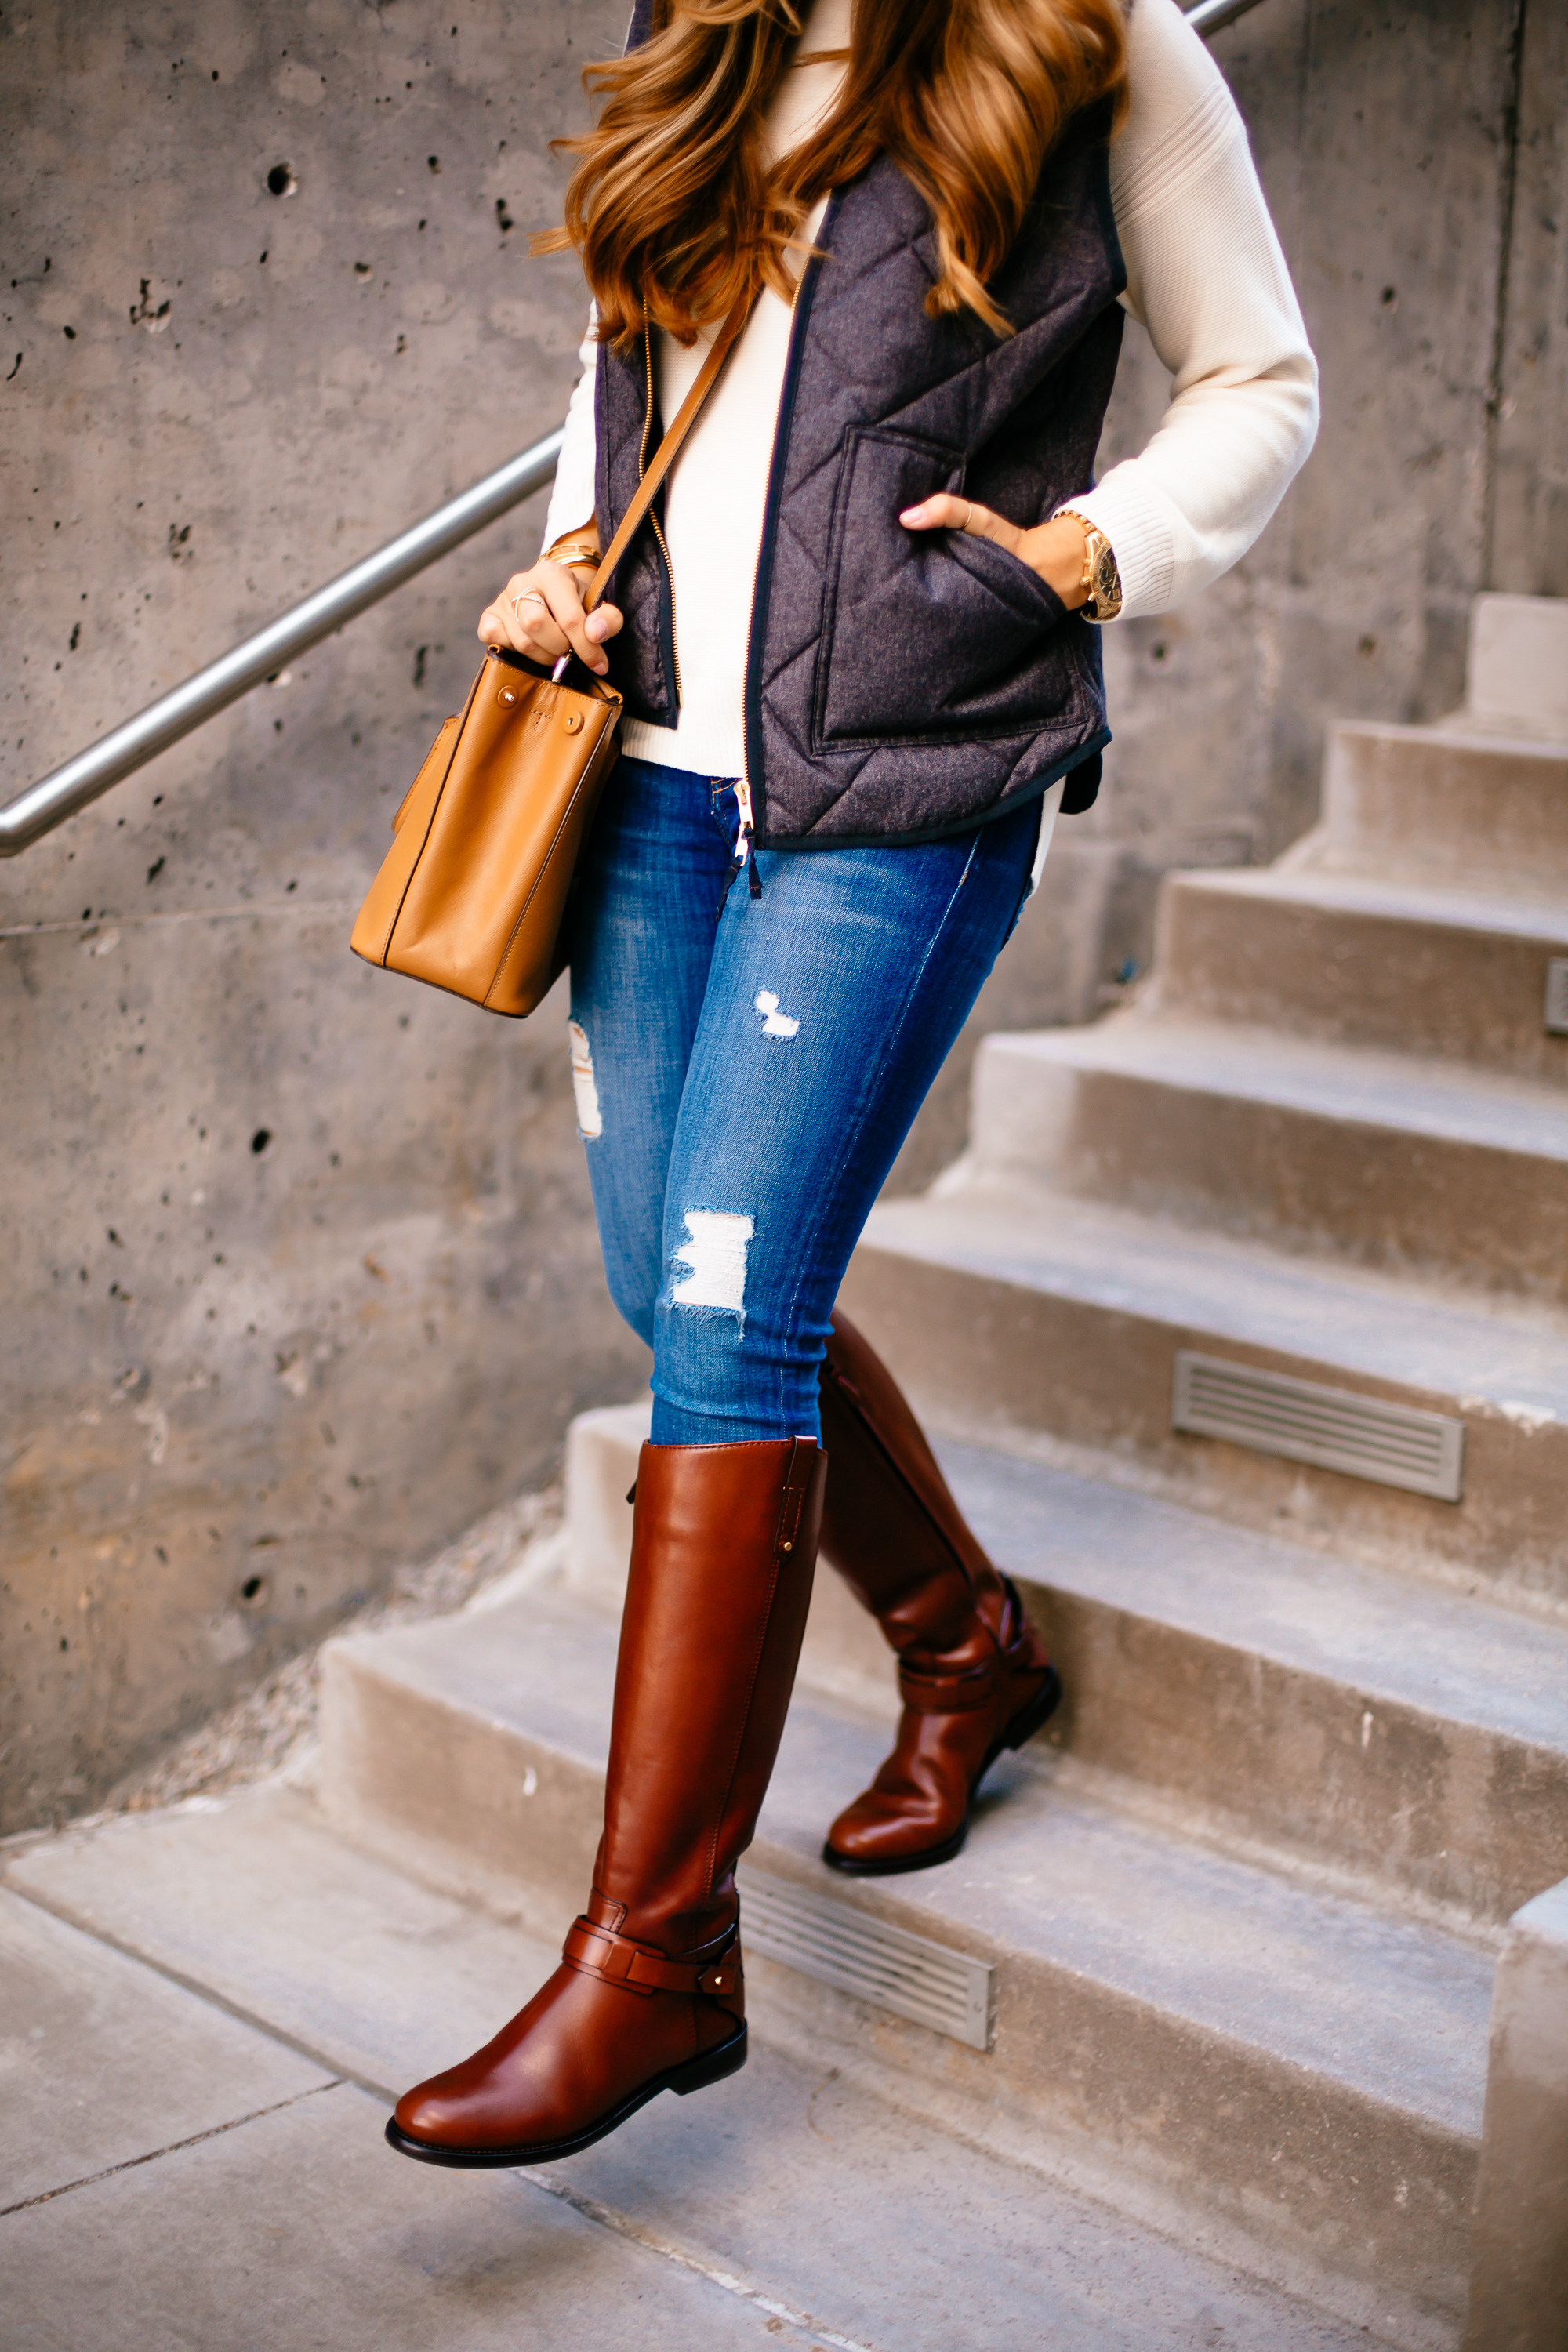 Quilted Vest & Riding Boots | The Teacher Diva: a Dallas Fashion Blog  featuring Beauty & Lifestyle